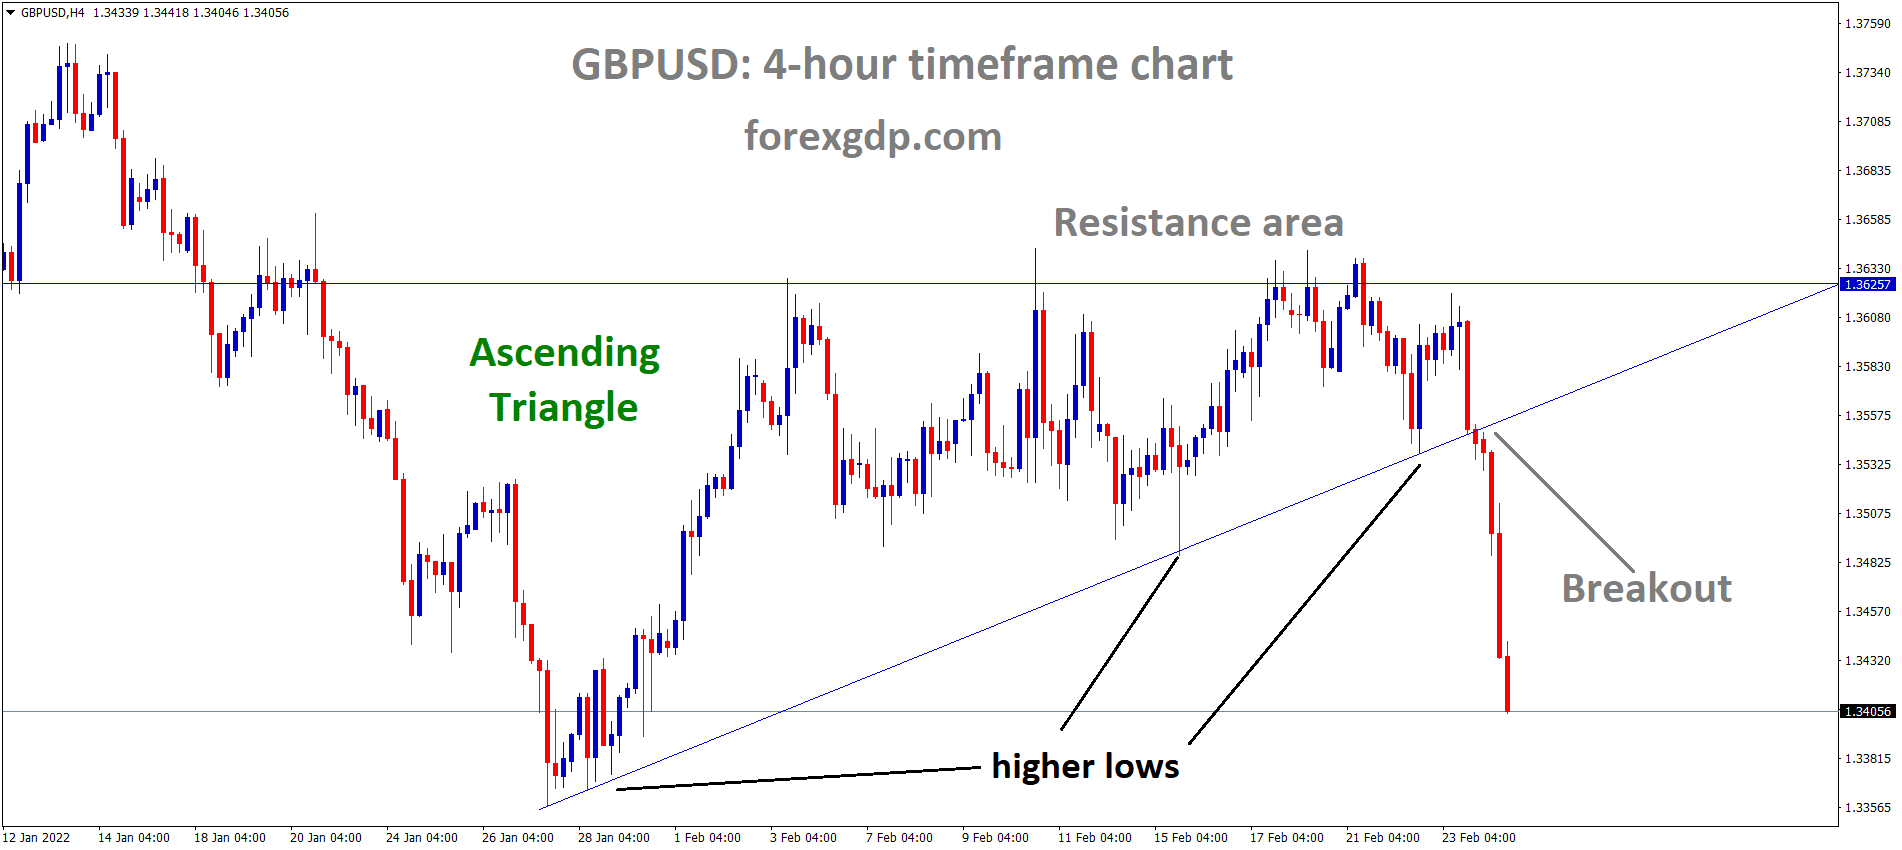 GBPUSD has broken the Ascending Triangle pattern.